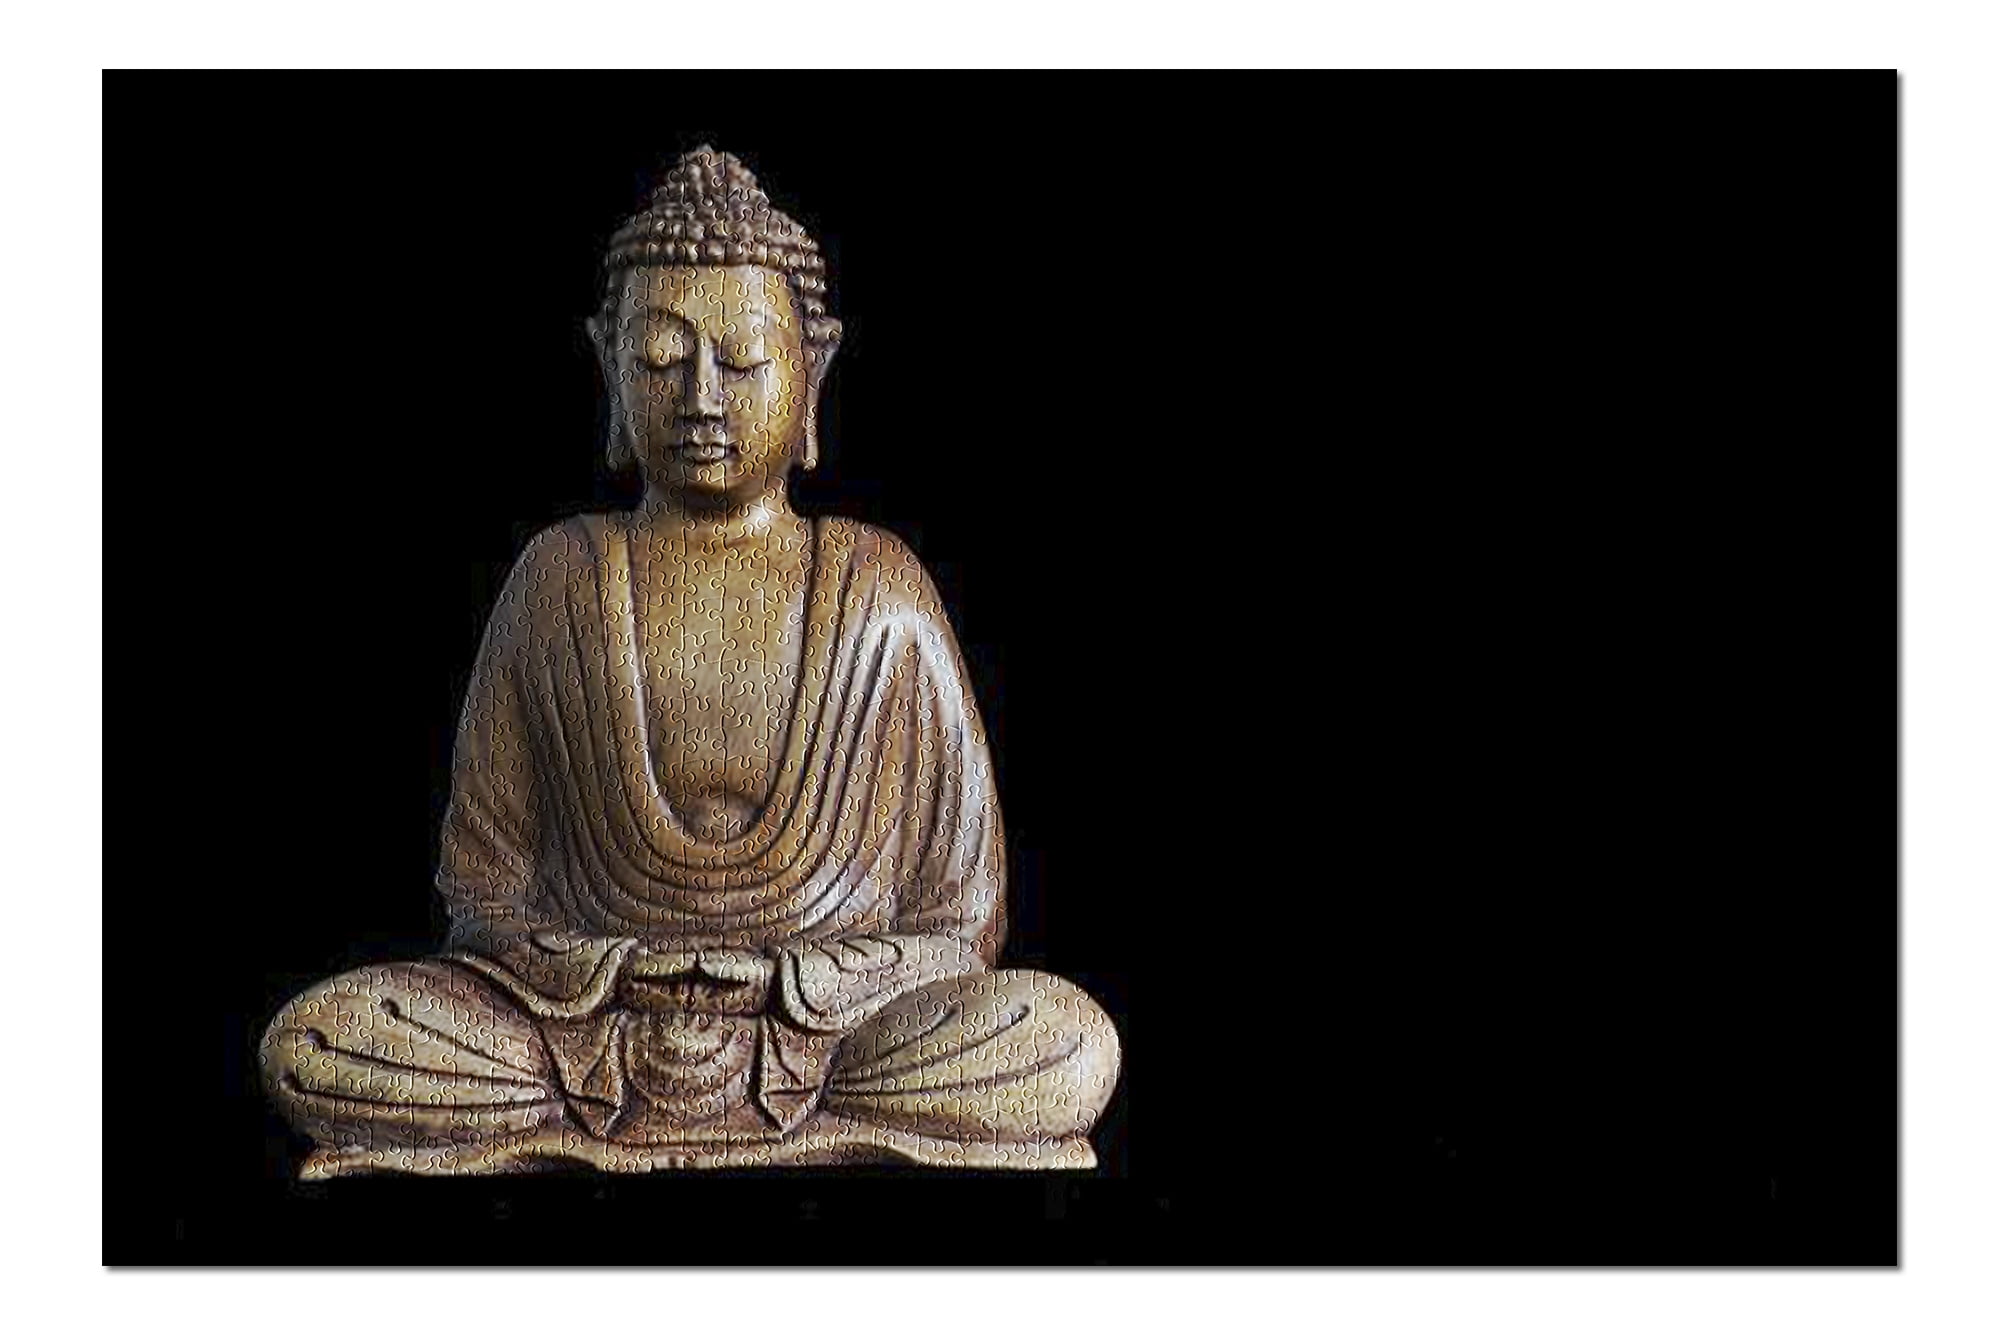 Puzzles for Adults 500 Piece Jigsaw Puzzle for Adults 500 Pieces Jigsaw Puzzles HD Color Design Great for Home Decor Buddha Statue